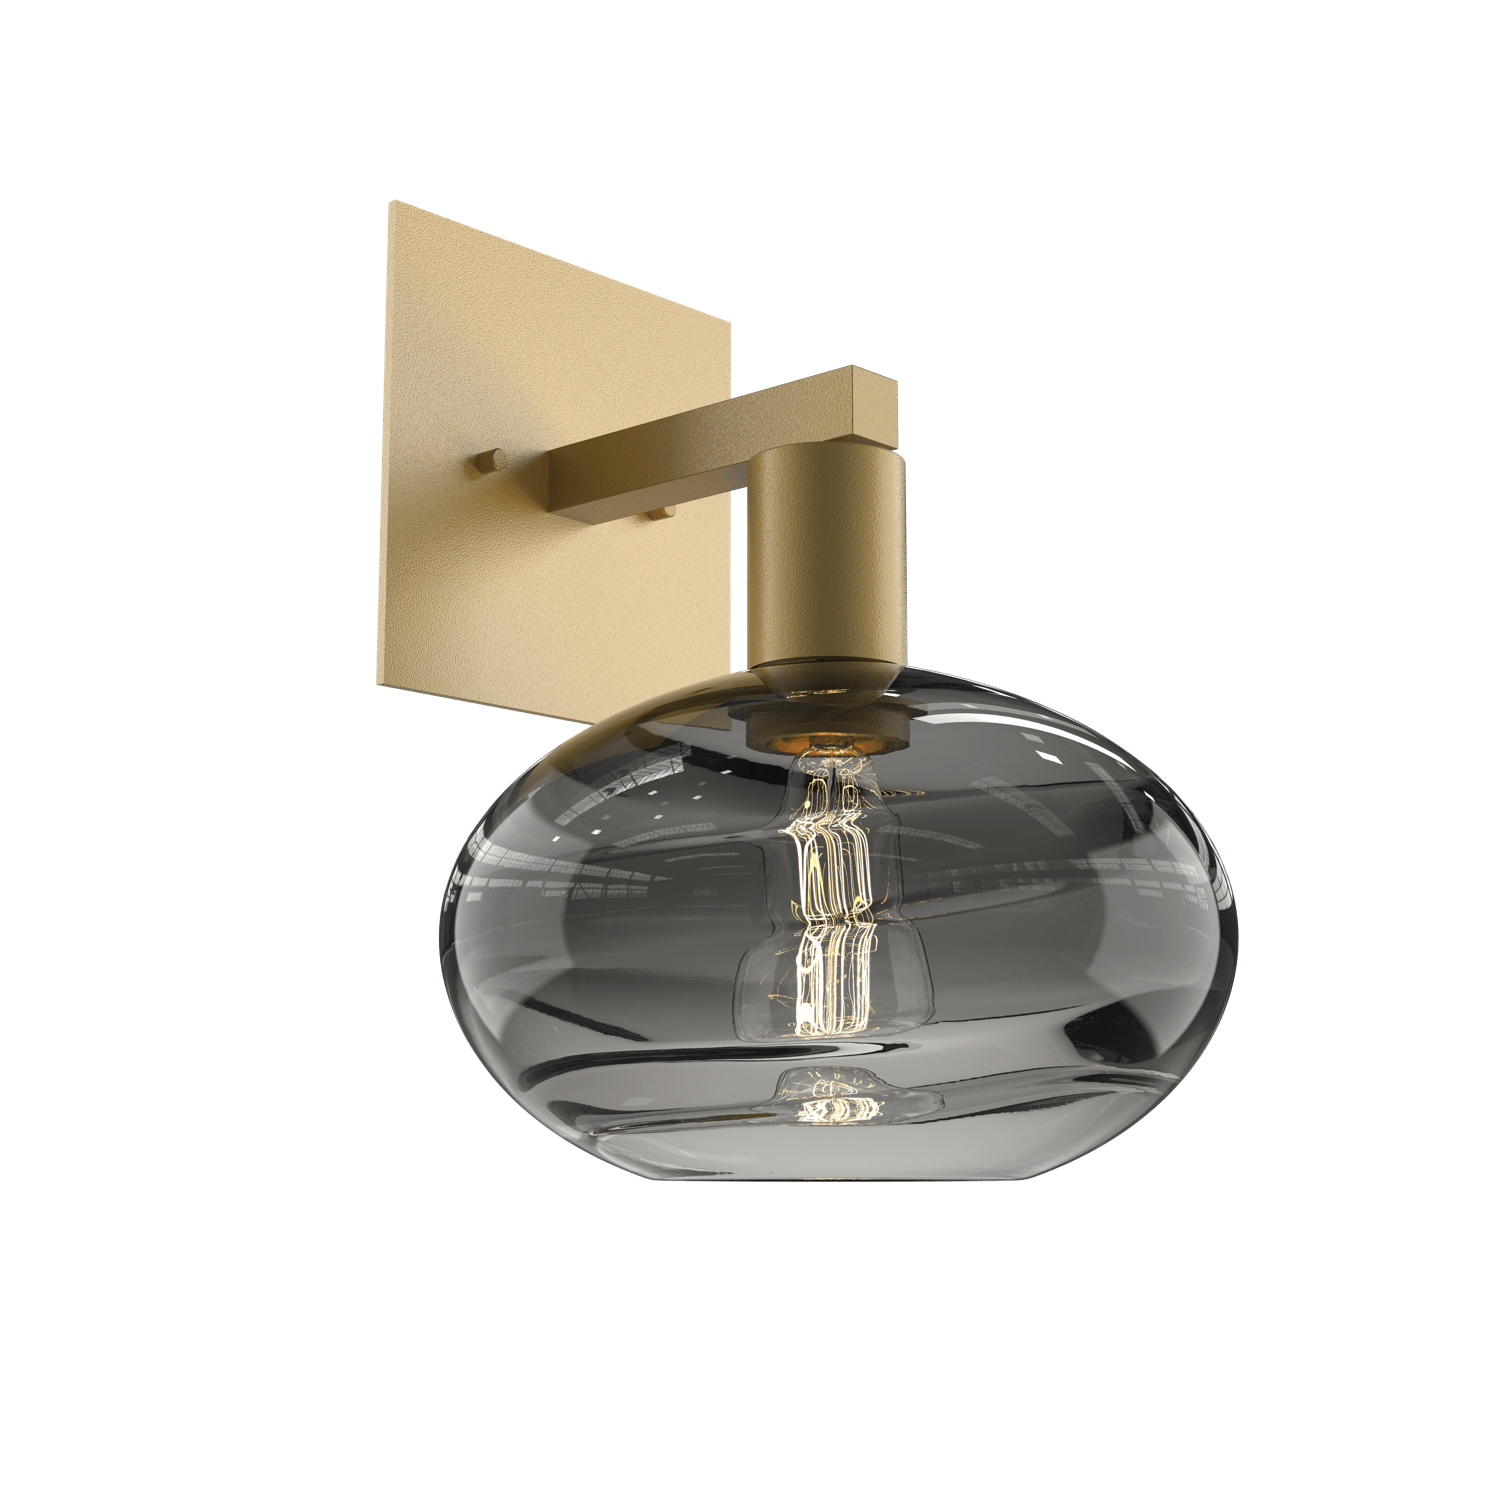 IDB0036-11-GB-OS-Hammerton-Studio-Optic-Blown-Glass-Coppa-wall-sconce-with-gilded-brass-finish-and-optic-smoke-blown-glass-shades-and-incandescent-lamping